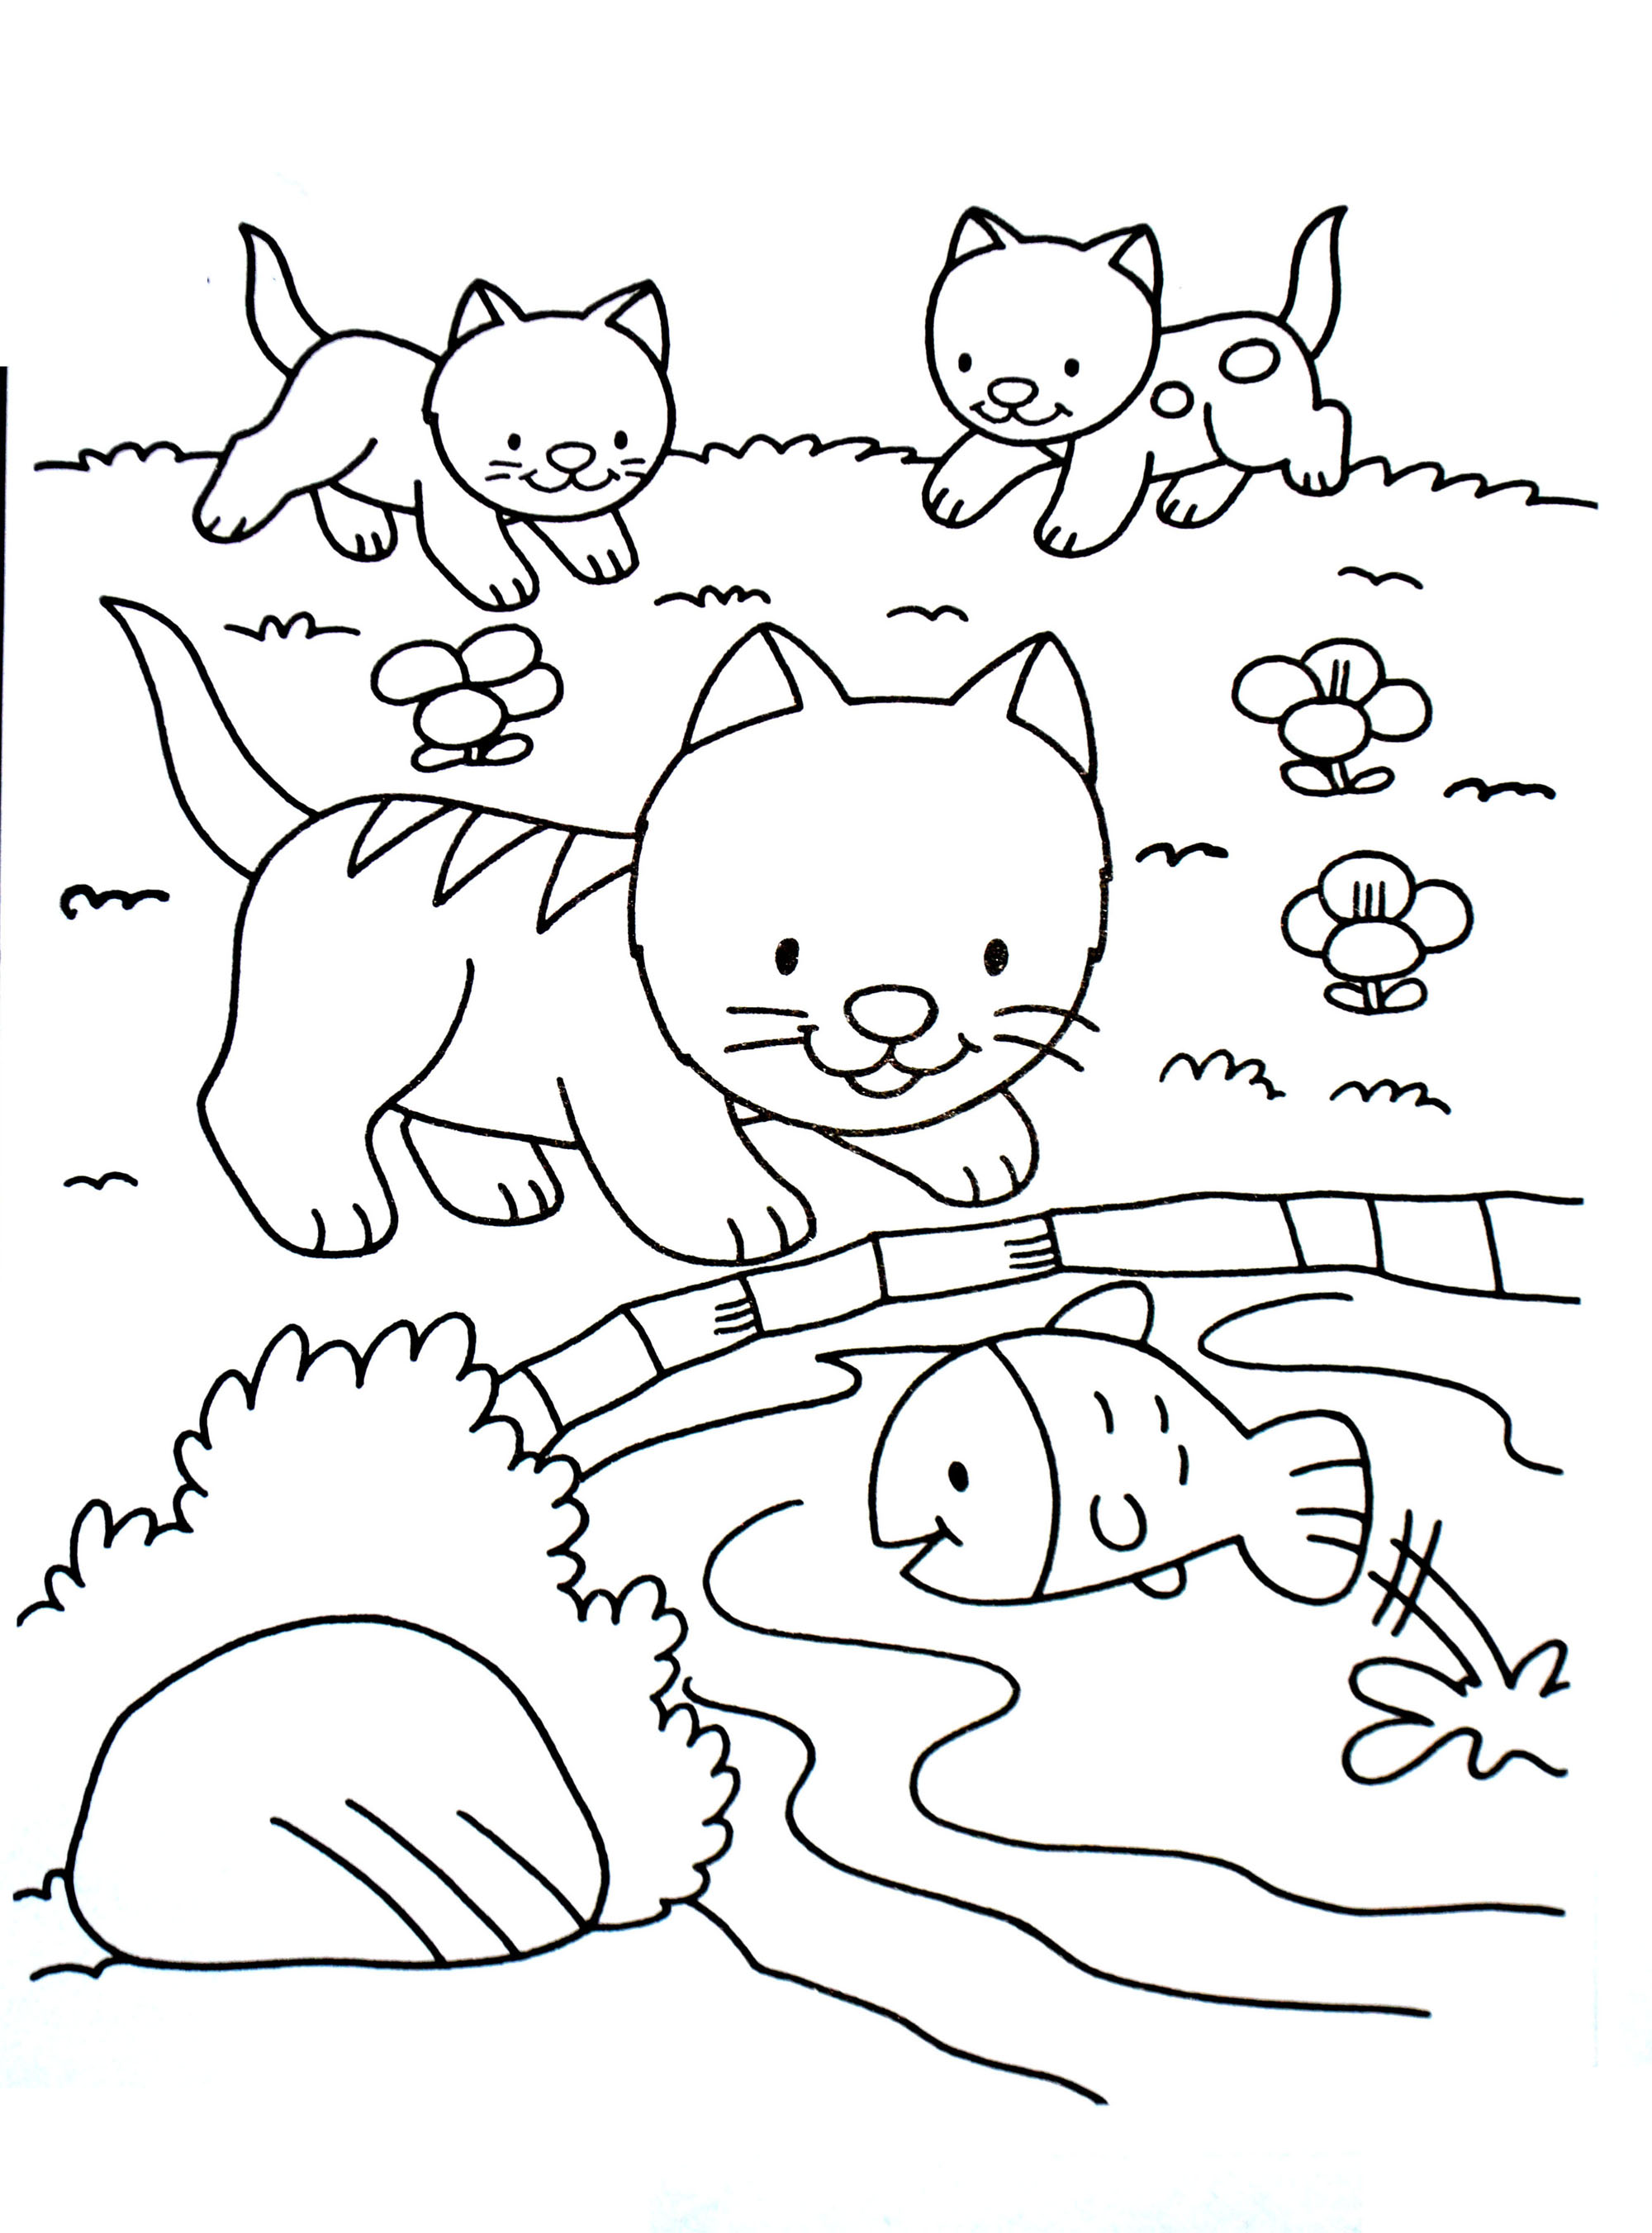 Cute Coloring Page With Kittens Cats Kids Coloring Pages